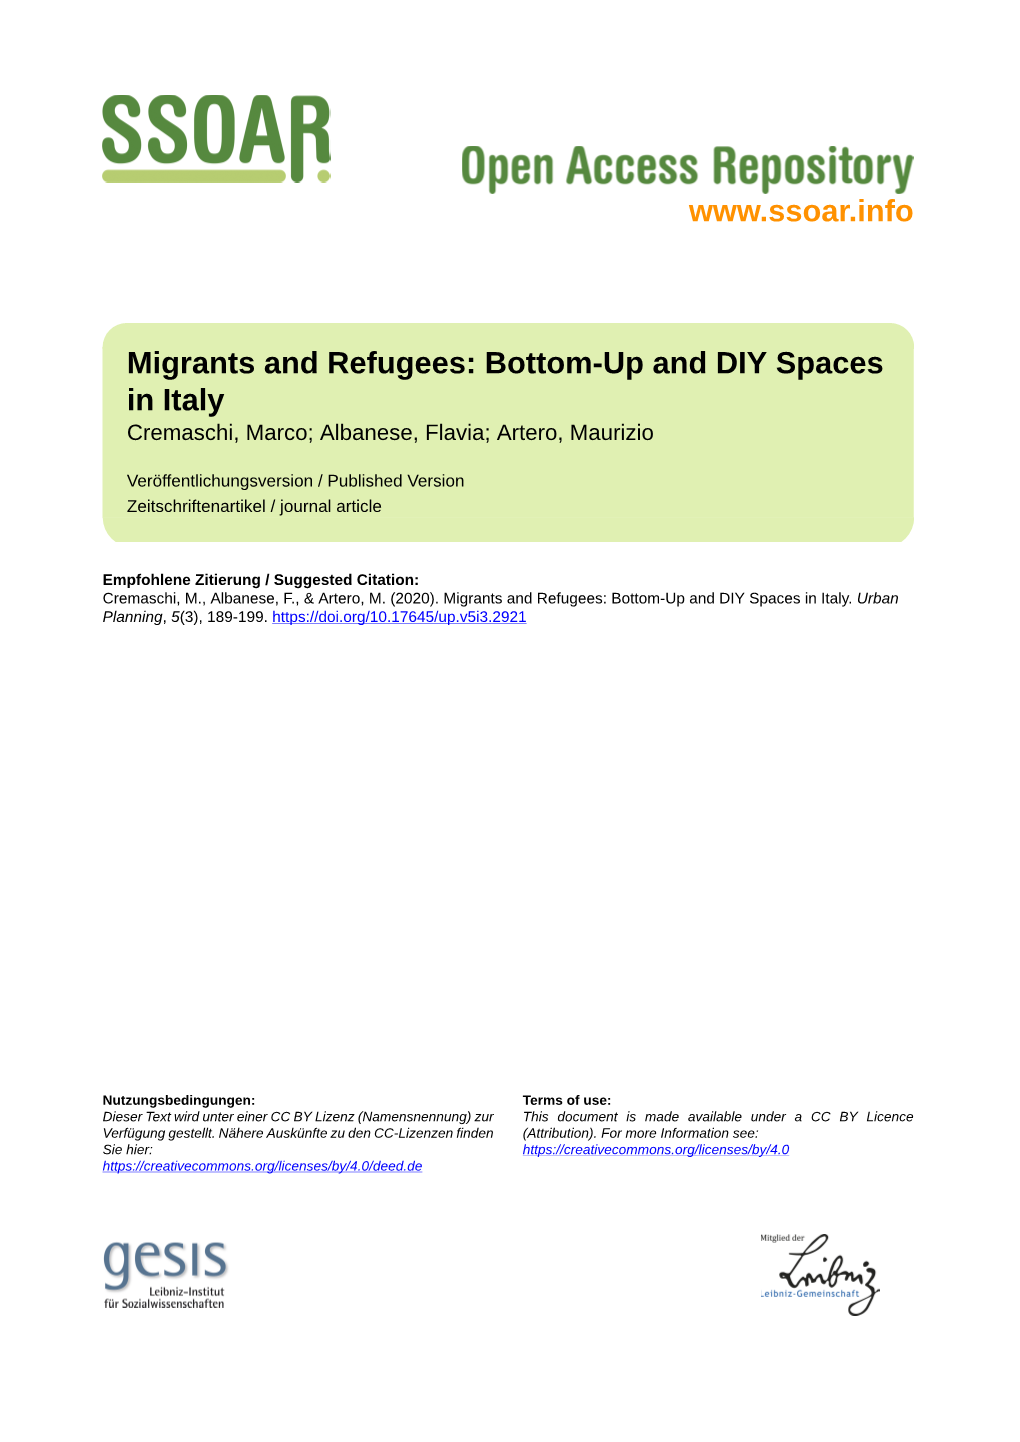 Migrants and Refugees: Bottom-Up and DIY Spaces in Italy Cremaschi, Marco; Albanese, Flavia; Artero, Maurizio